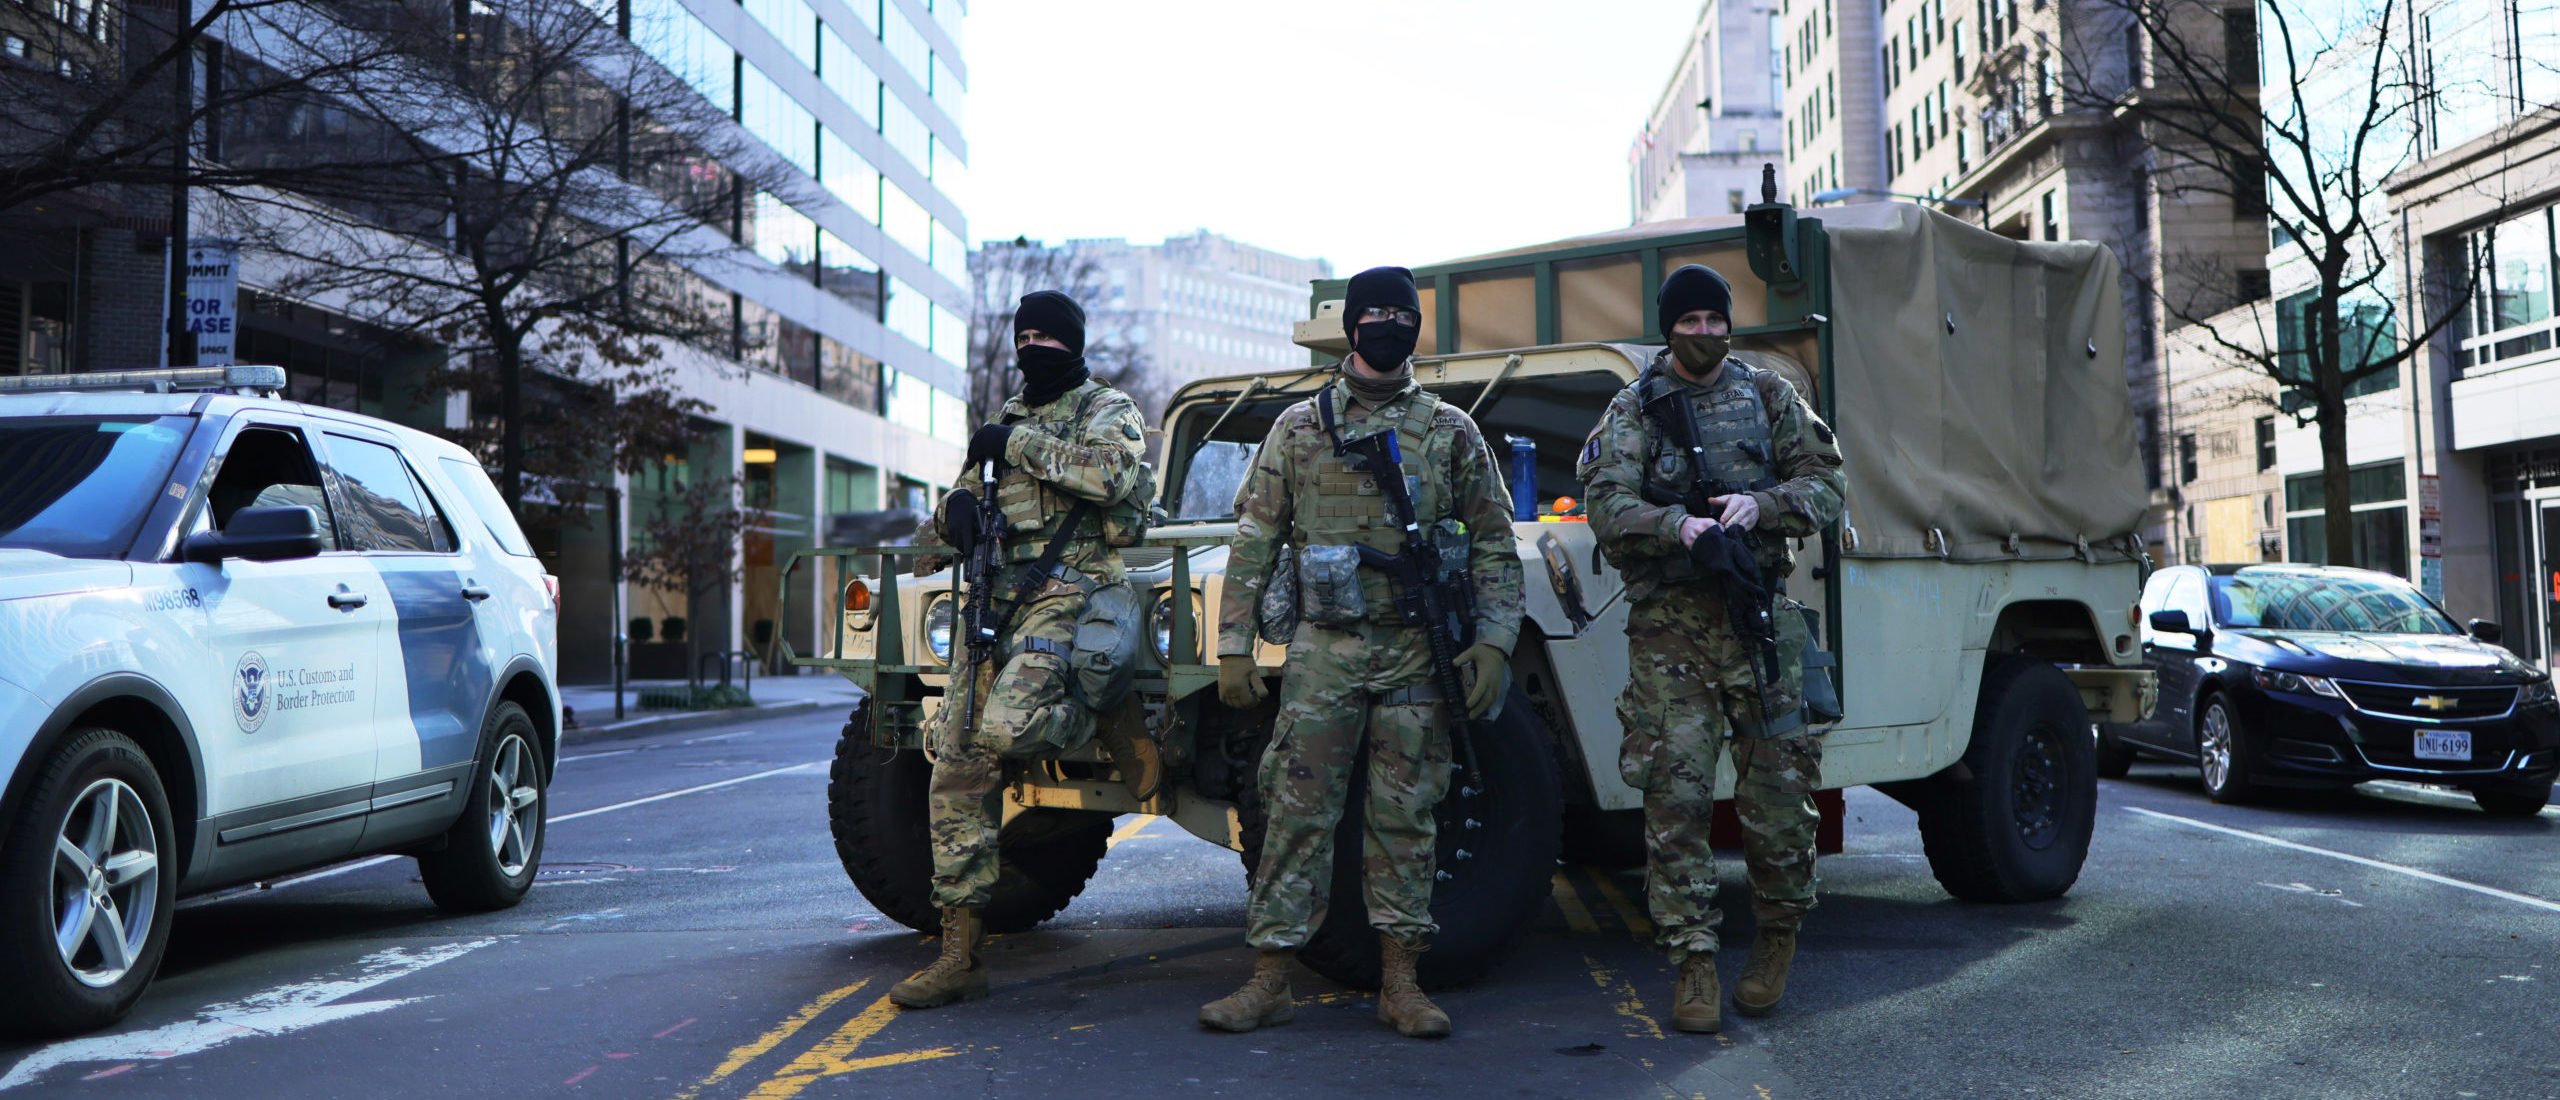 WASHINGTON, DC - JANUARY 18: National Guardsmen stand guard on 15th Street NW on January 18, 2021 in Washington, DC. After last week's riots at the U.S. Capitol Building, the FBI has warned of additional threats in the nation's capital and in all 50 states. According to reports, as many as 25,000 National Guard soldiers will be guarding the city as preparations are made for the inauguration of Joe Biden as the 46th U.S. President. (Photo by Michael M. Santiago/Getty Images)